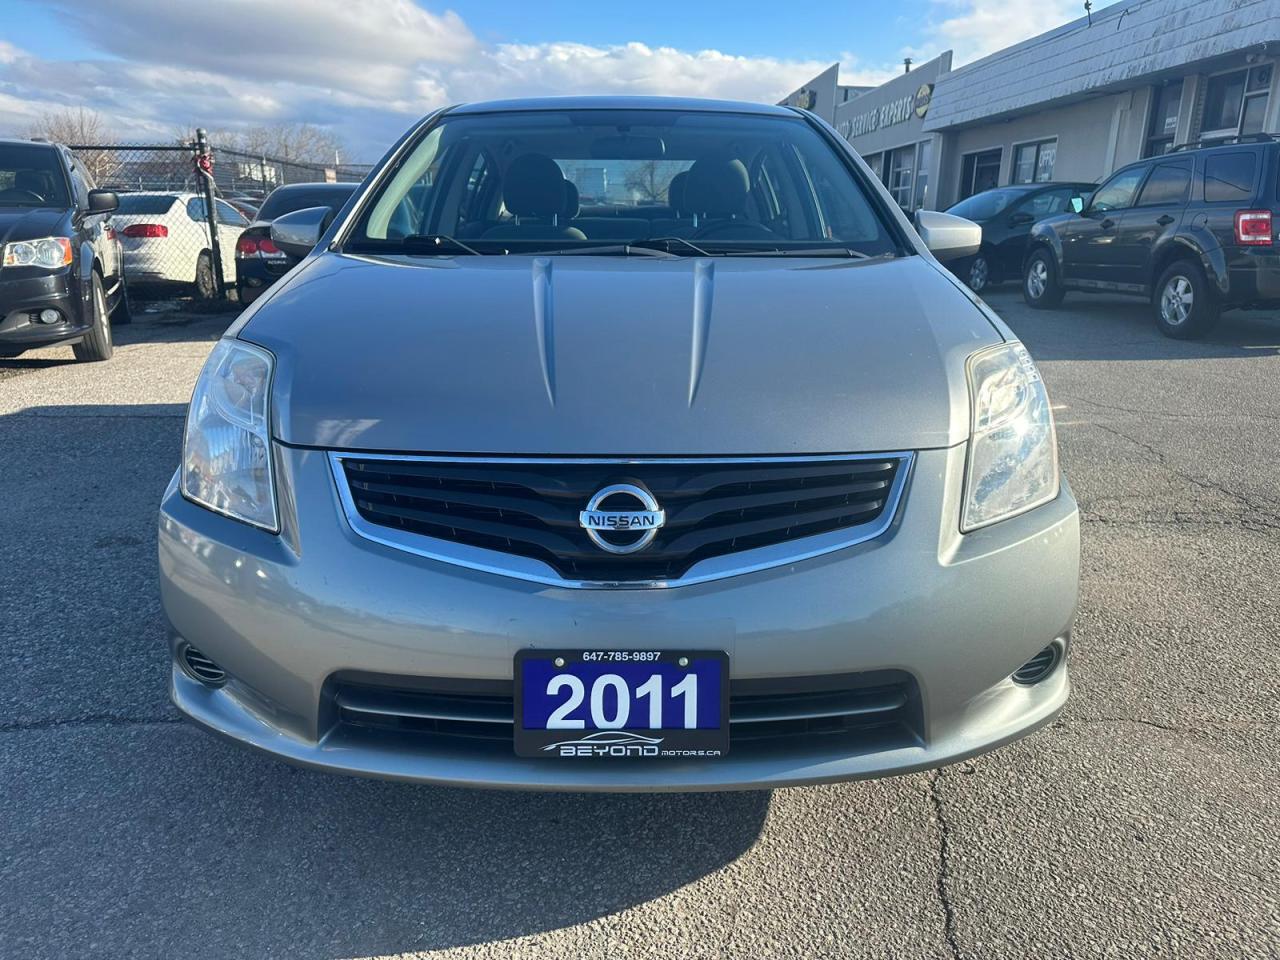 2011 Nissan Sentra CERTIFIED WITH 3V YEARS WARRANTY INCLUDED - Photo #1